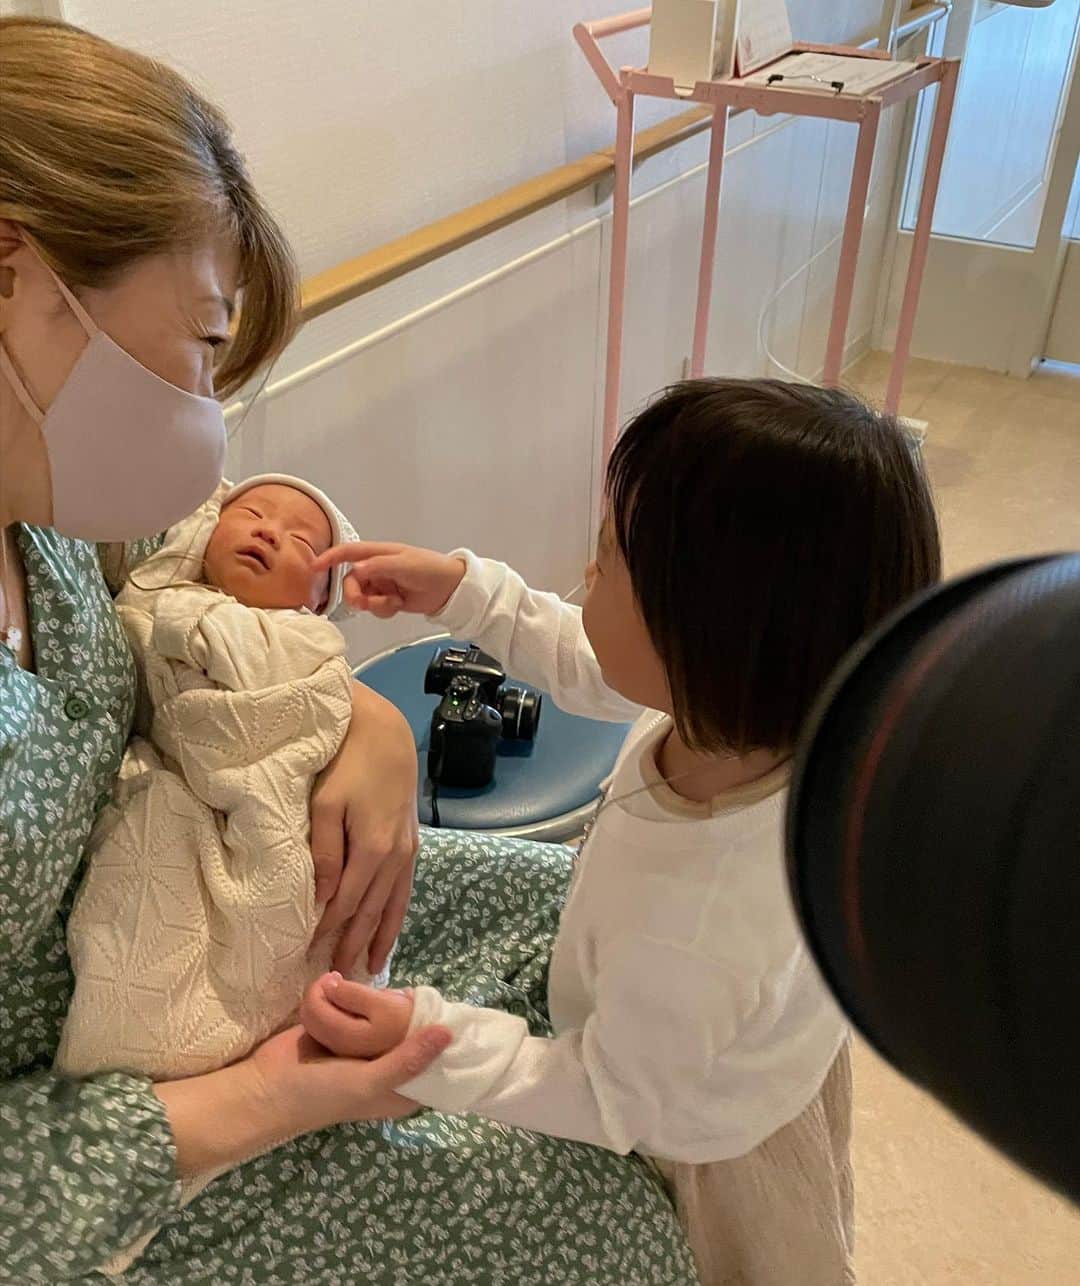 吉田ちかさんのインスタグラム写真 - (吉田ちかInstagram)「Hey guys! Baby and I checked out of the hospital and finally got to go home to Pudding and Osaru-san💕  I was so excited to see Pudding, but she seemed more excited to see the baby than anything else lol   As soon as she saw him she was like “He’s so cute! Can I hold him?!” And it’s been that over and over again ever since lol   Life back home is extremely hectic lol Trying to juggle both the baby and Pudding omg This is going to take some getting used to 😅 but I don’t mind the challenge and am super excited for our new journey together!!   無事退院して、赤ちゃんを連れてやっとプリンとおさるさんに会えました💕  すっかりお姉ちゃんになったプリンに会うのが楽しみ過ぎましたが、プリンは私との再会よりもベビーと初めて会うことが何よりも嬉しったみたいで、会った瞬間からHe’s so cute! Can I hold him?? と聞いてきて、それかやずーっと抱っこしたい抱っこしたい言ってますw 🤣  家での生活は、早速慌ただしくて😅ベビーを抱っこしながらプリンにもアテンションを💦  慣れるまで少し時間が掛かりそうですが😱これから始まる自分たちの冒険にワクワクしています💕  P.S. おさるさんの顔、特に解禁してません😂前回の写真、マスクを付けていたので、いいかなーと思ったのですが、みんなが解禁！！みたいになってて逆にびっくり😅すみまさん🙈笑  #顔が浮腫みまくり💦」10月14日 20時20分 - bilingirl_chika